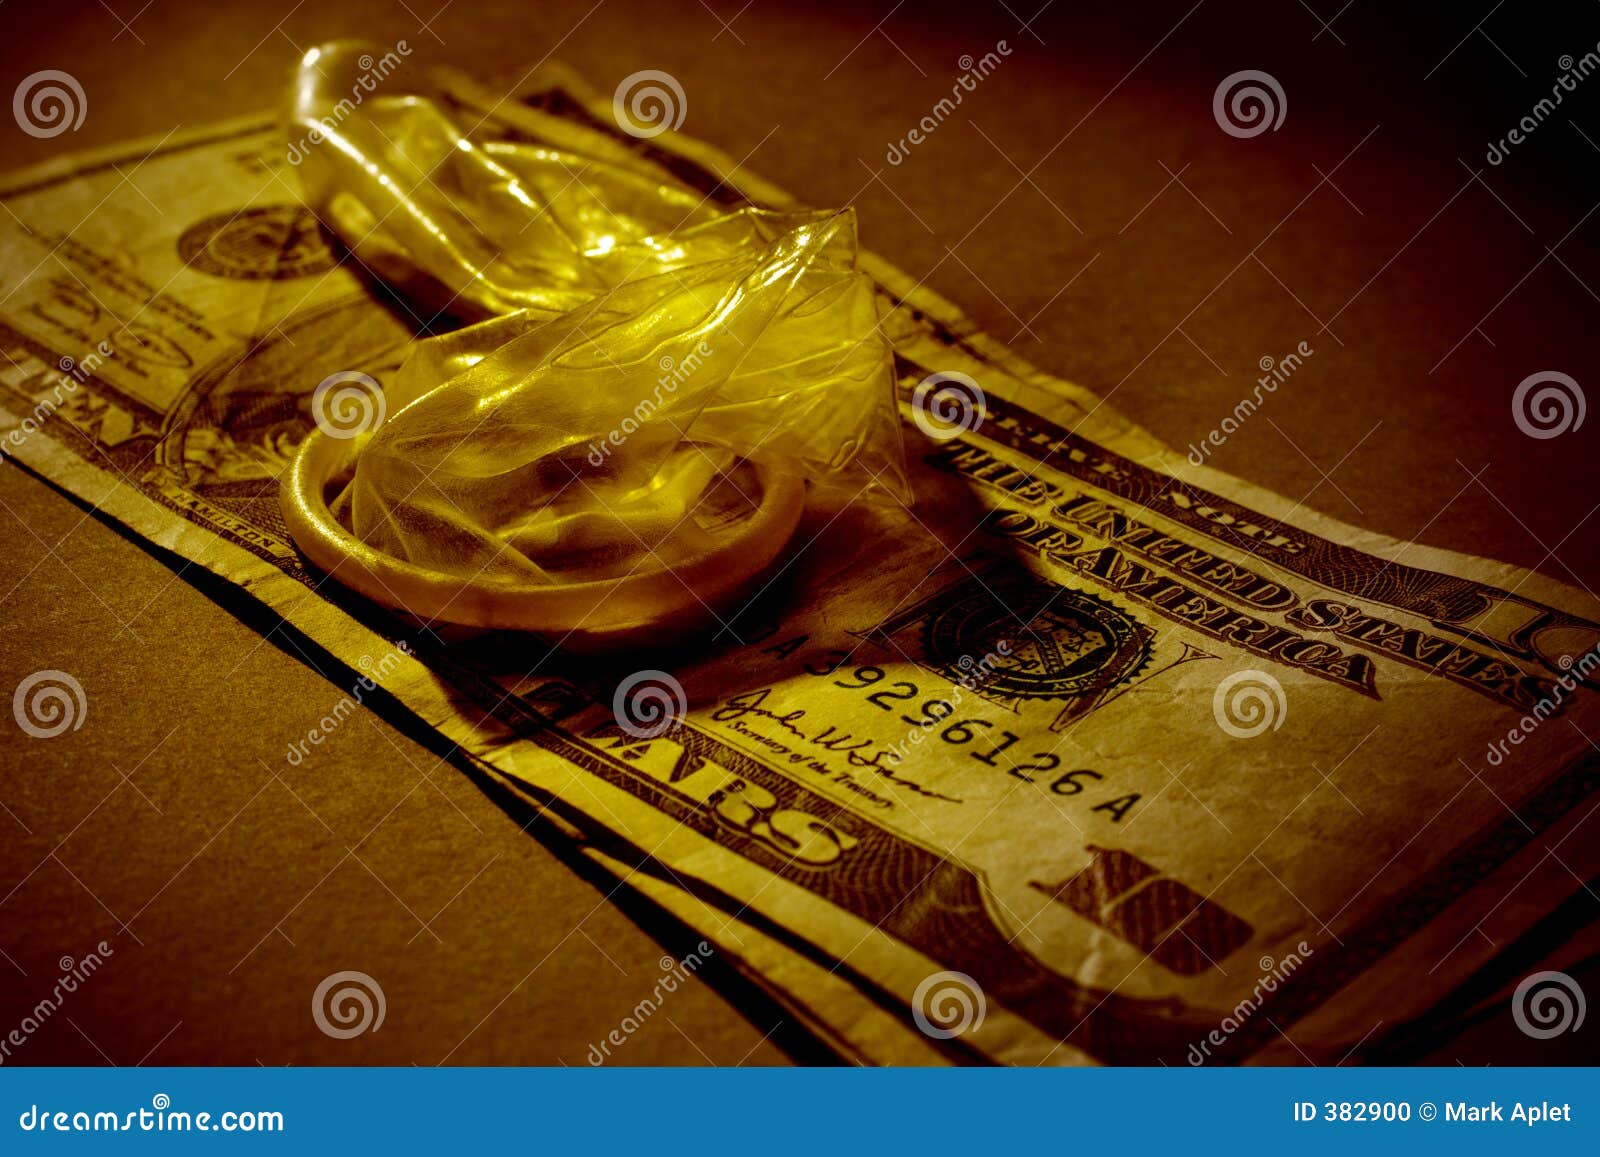 Sex and Money stock photo pic